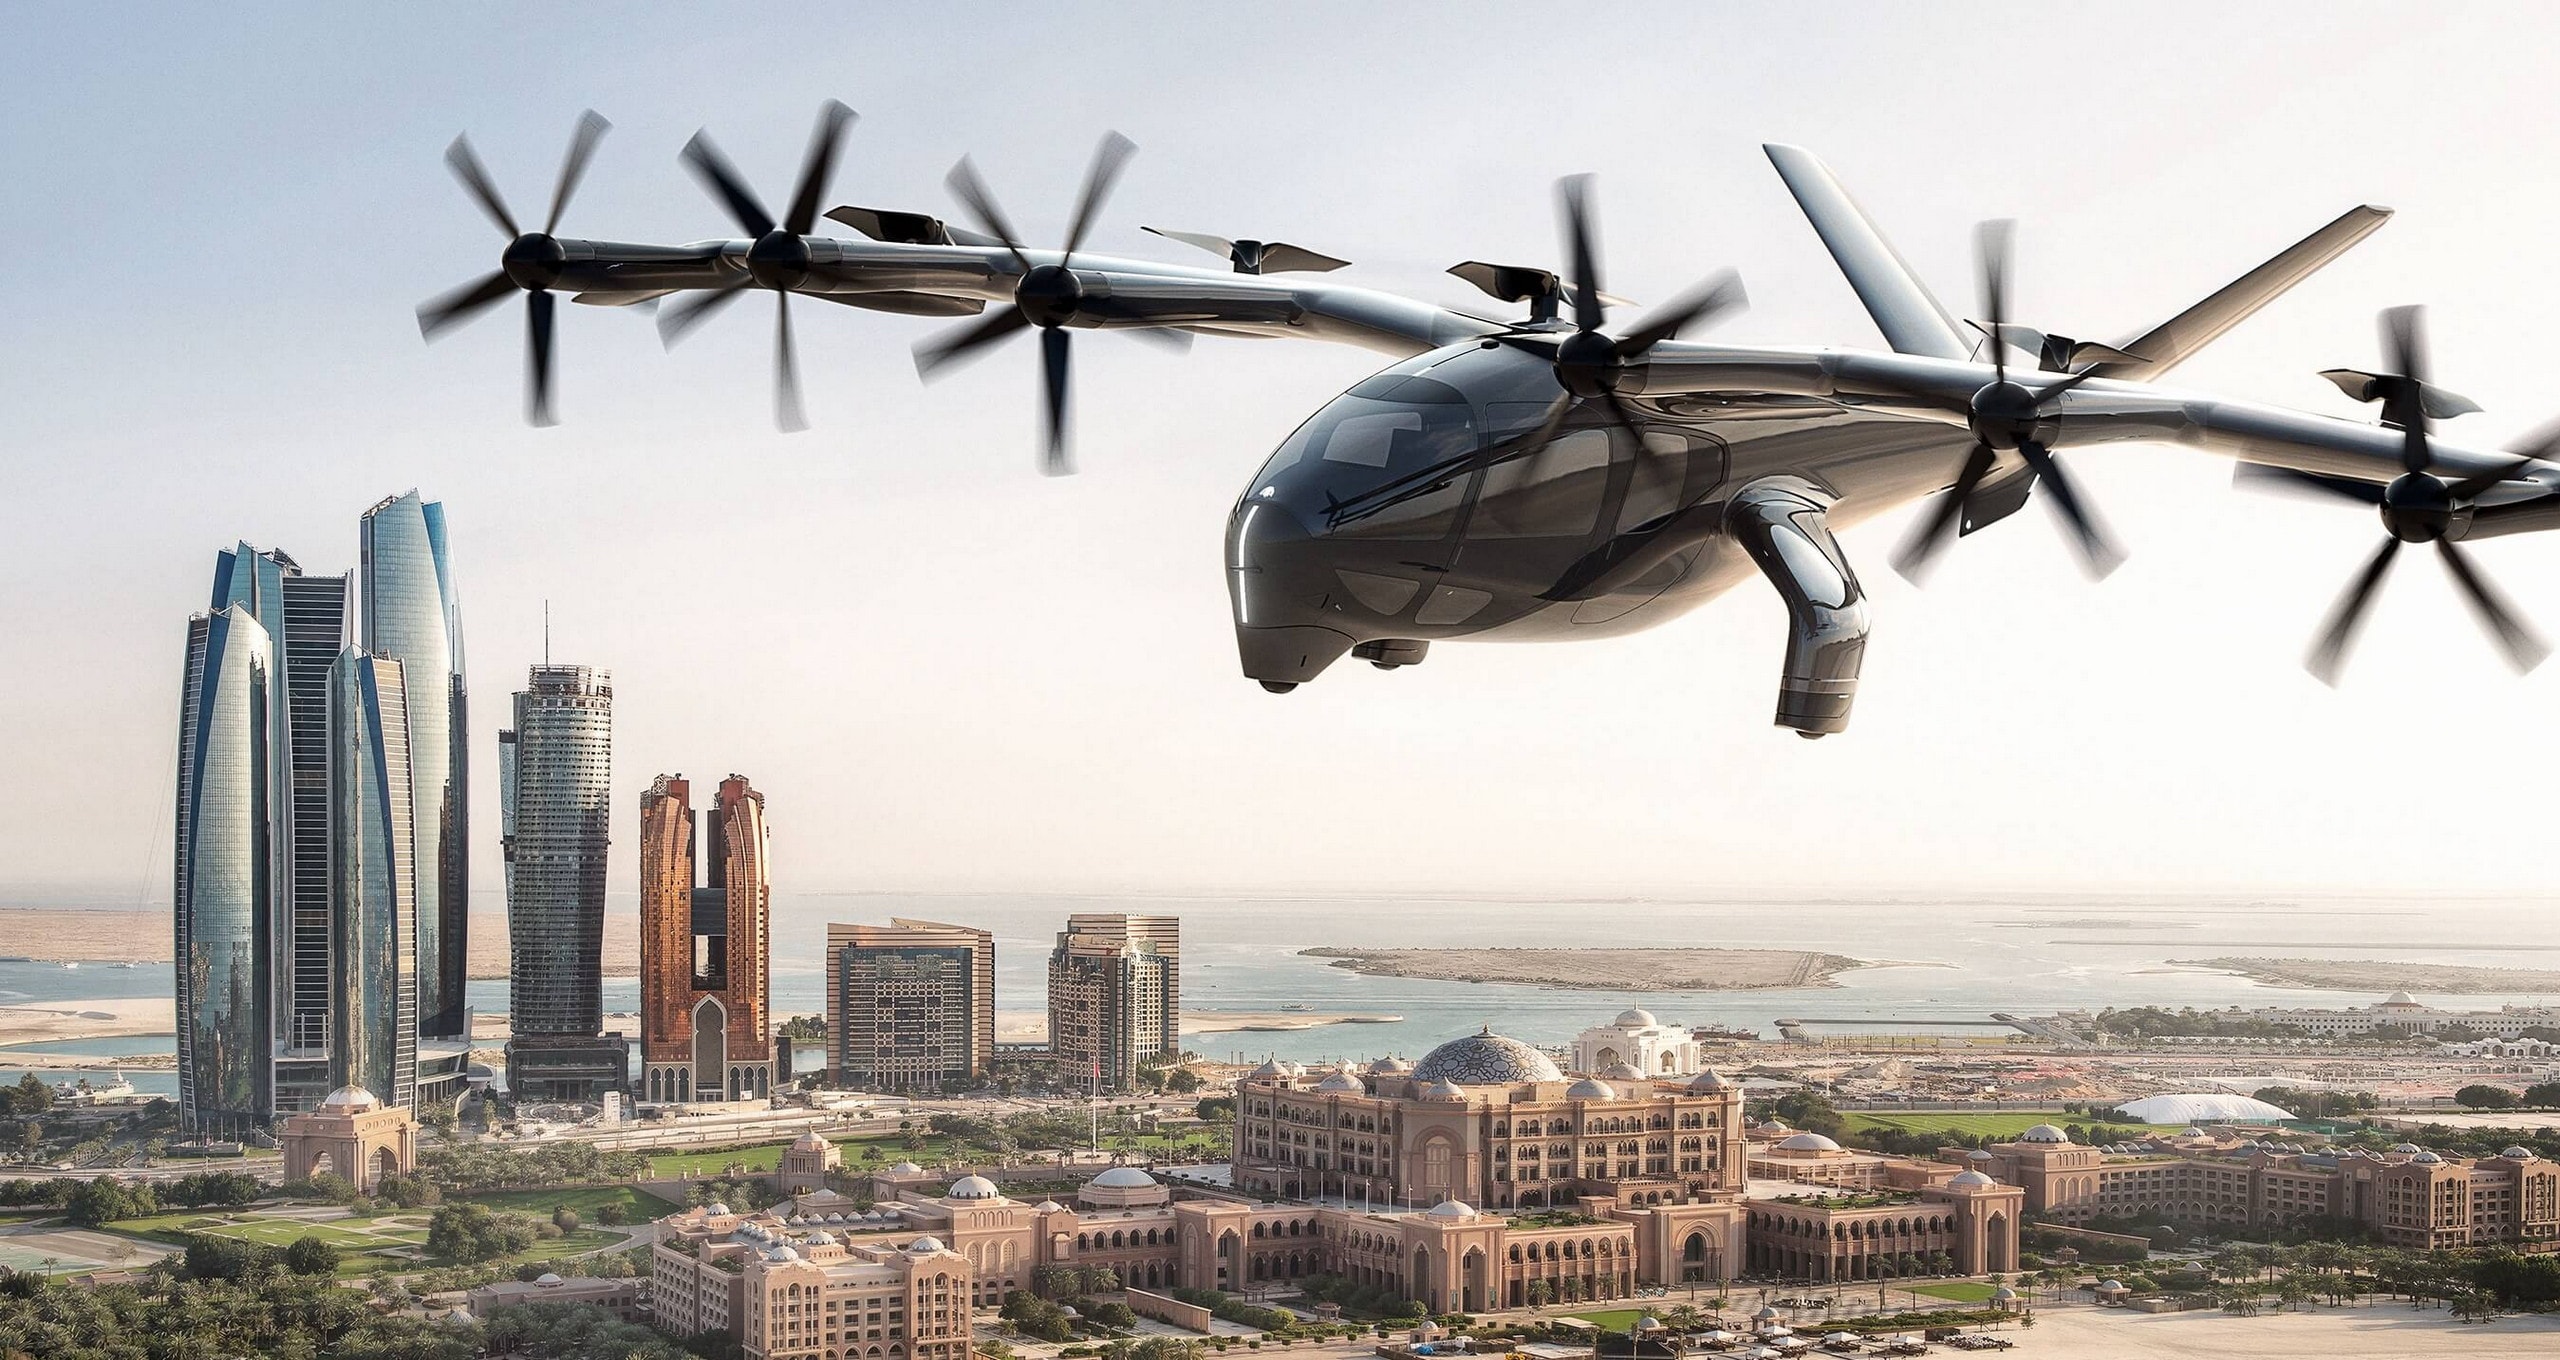 Midnight Air Taxi’s Battery Packs Pass Extreme Tests With Flying Colors